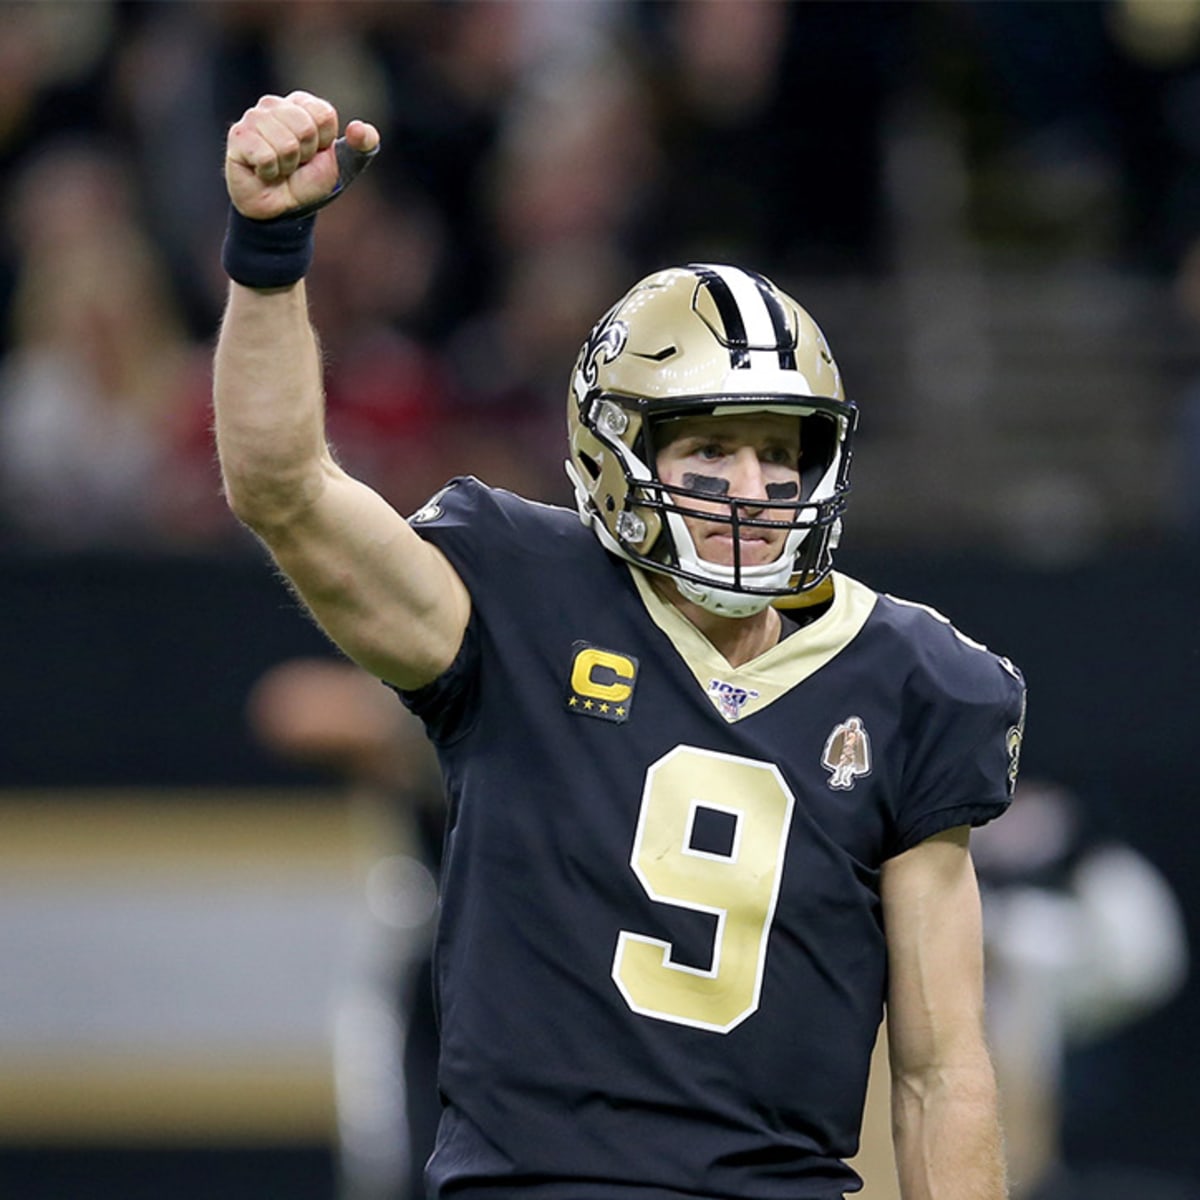 Saints vs. Browns live stream: TV channel, how to watch